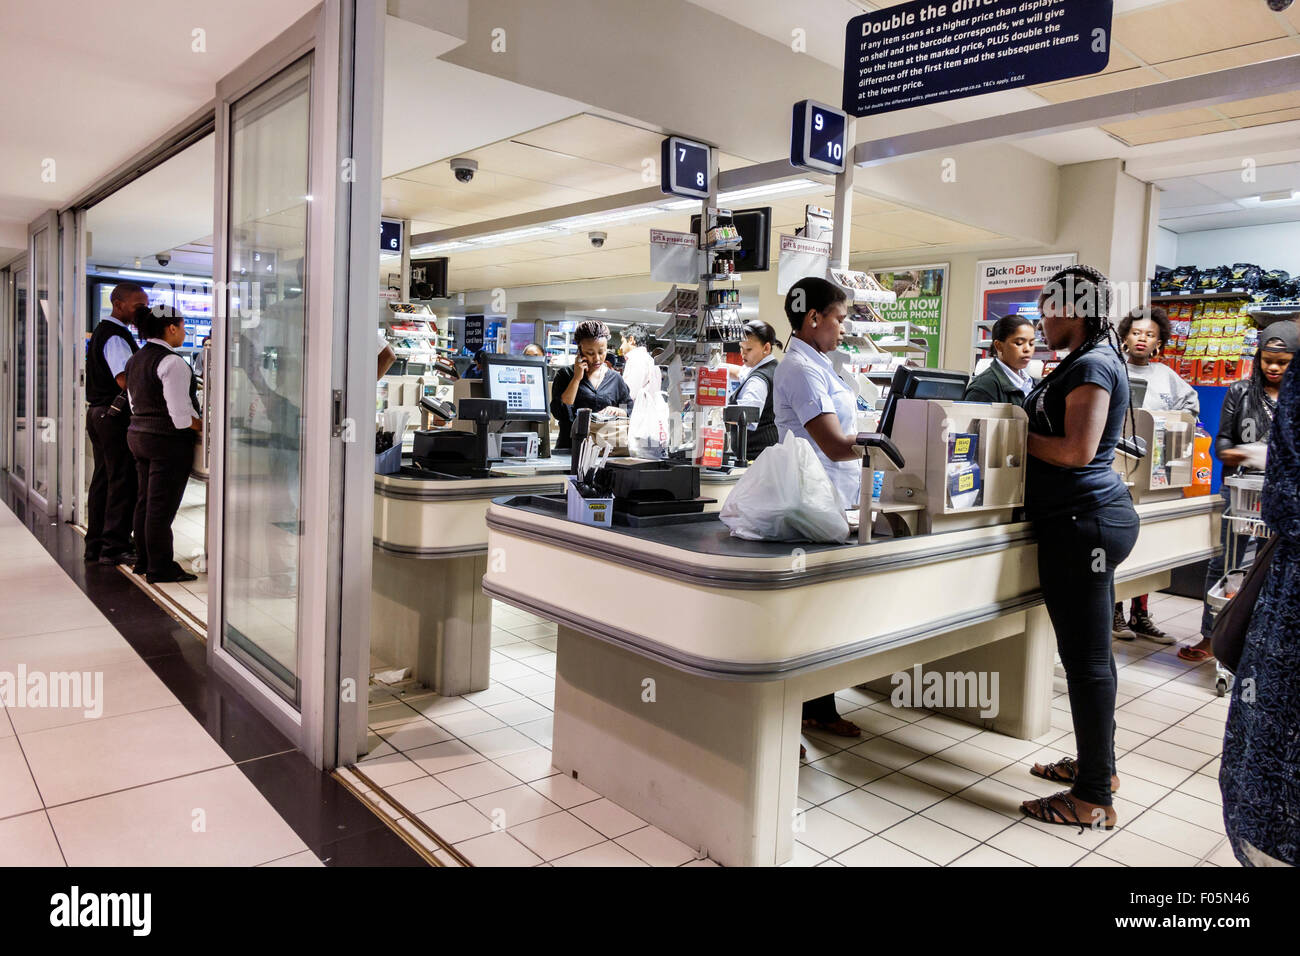 Cape Town South Africa,City Centre,center,Pick n Pay,grocery store,supermarket,interior inside,SAfri150310108 Stock Photo